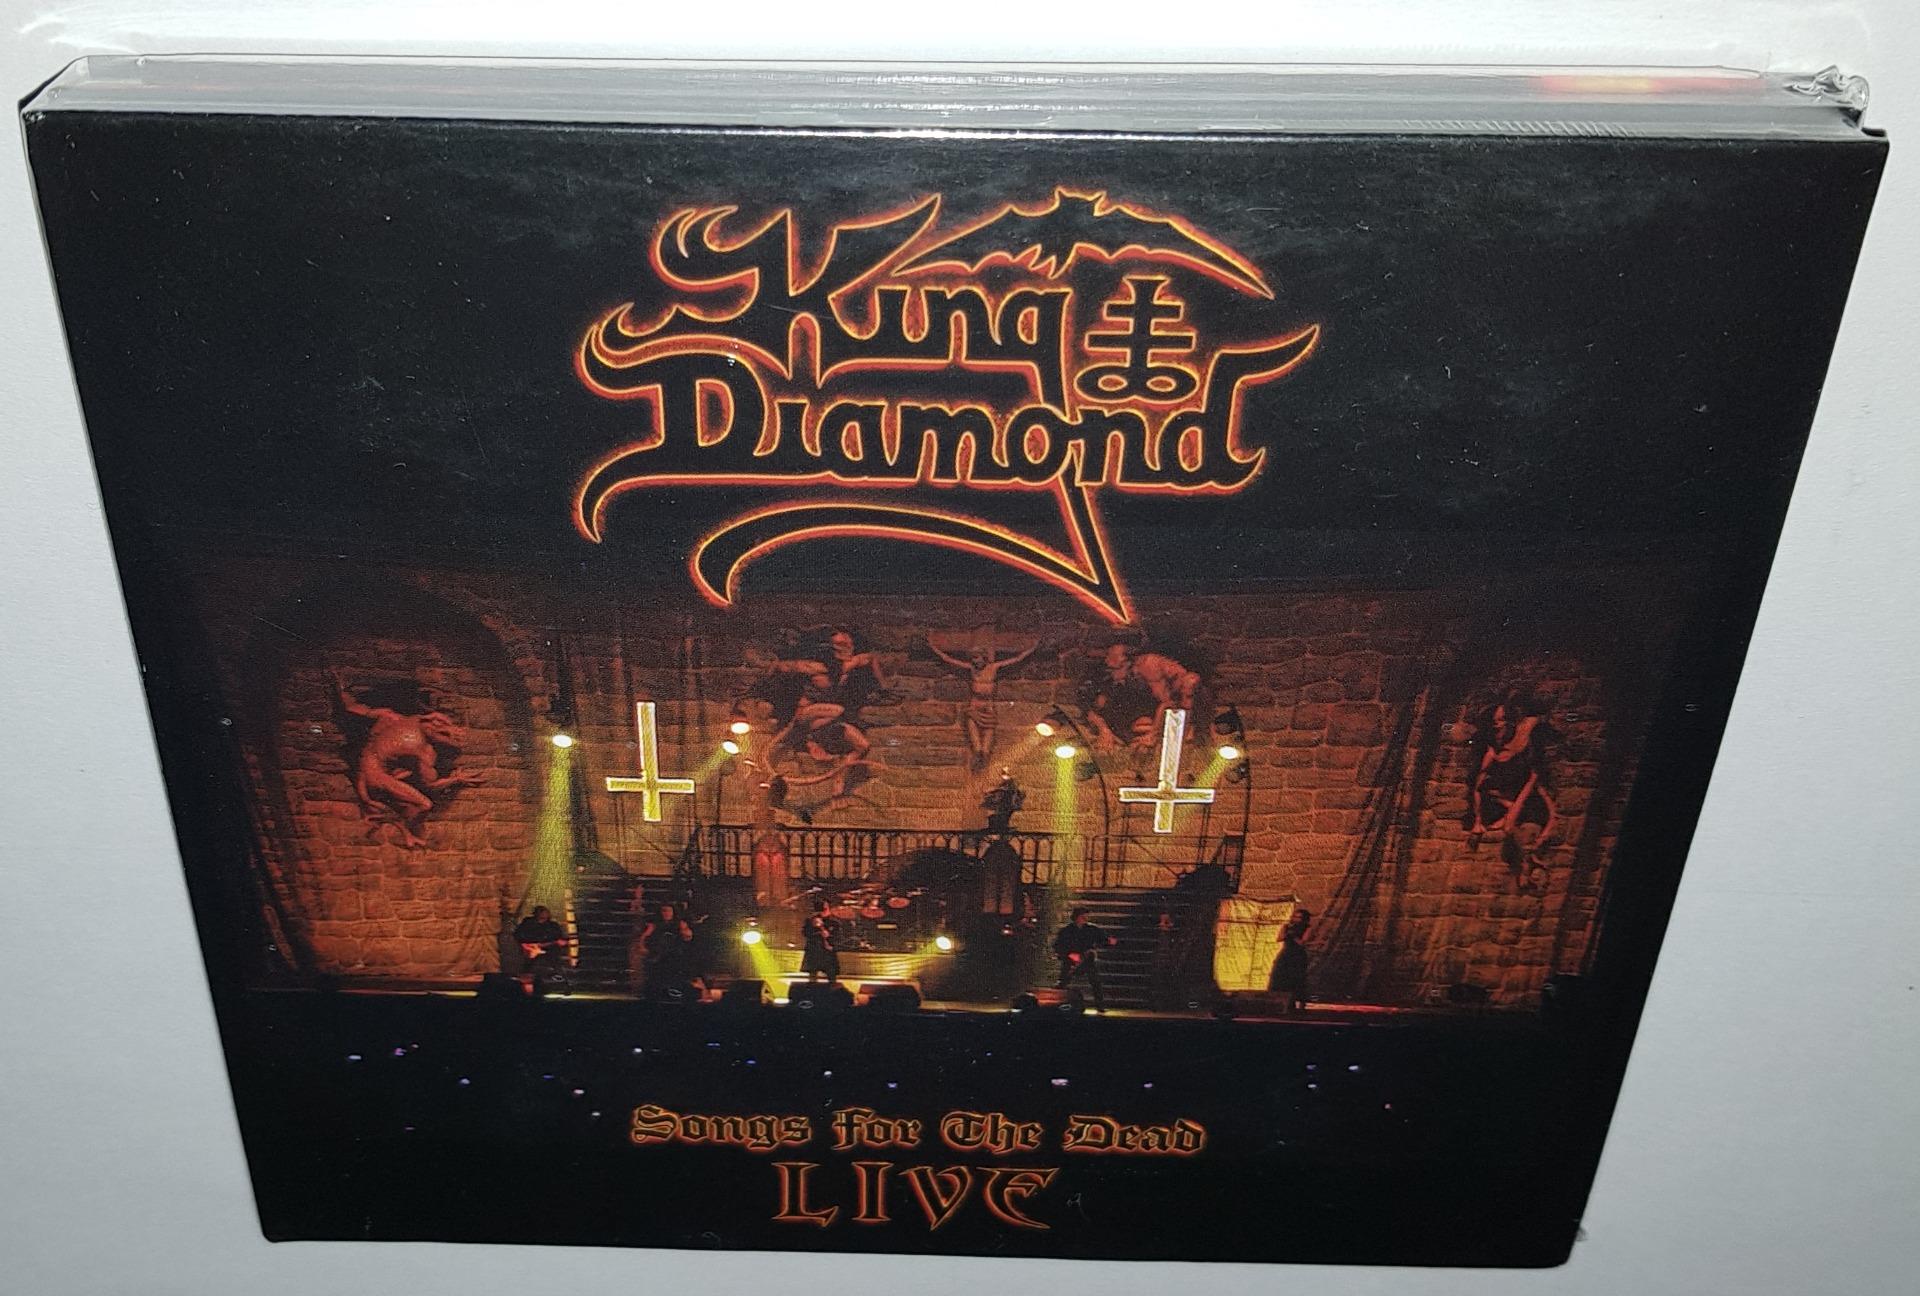 KING DIAMOND SONGS FOR THE DEAD LIVE (2019 RELEASE) BRAND NEW CD 2DVD - King Diamond Songs For The Dead Live